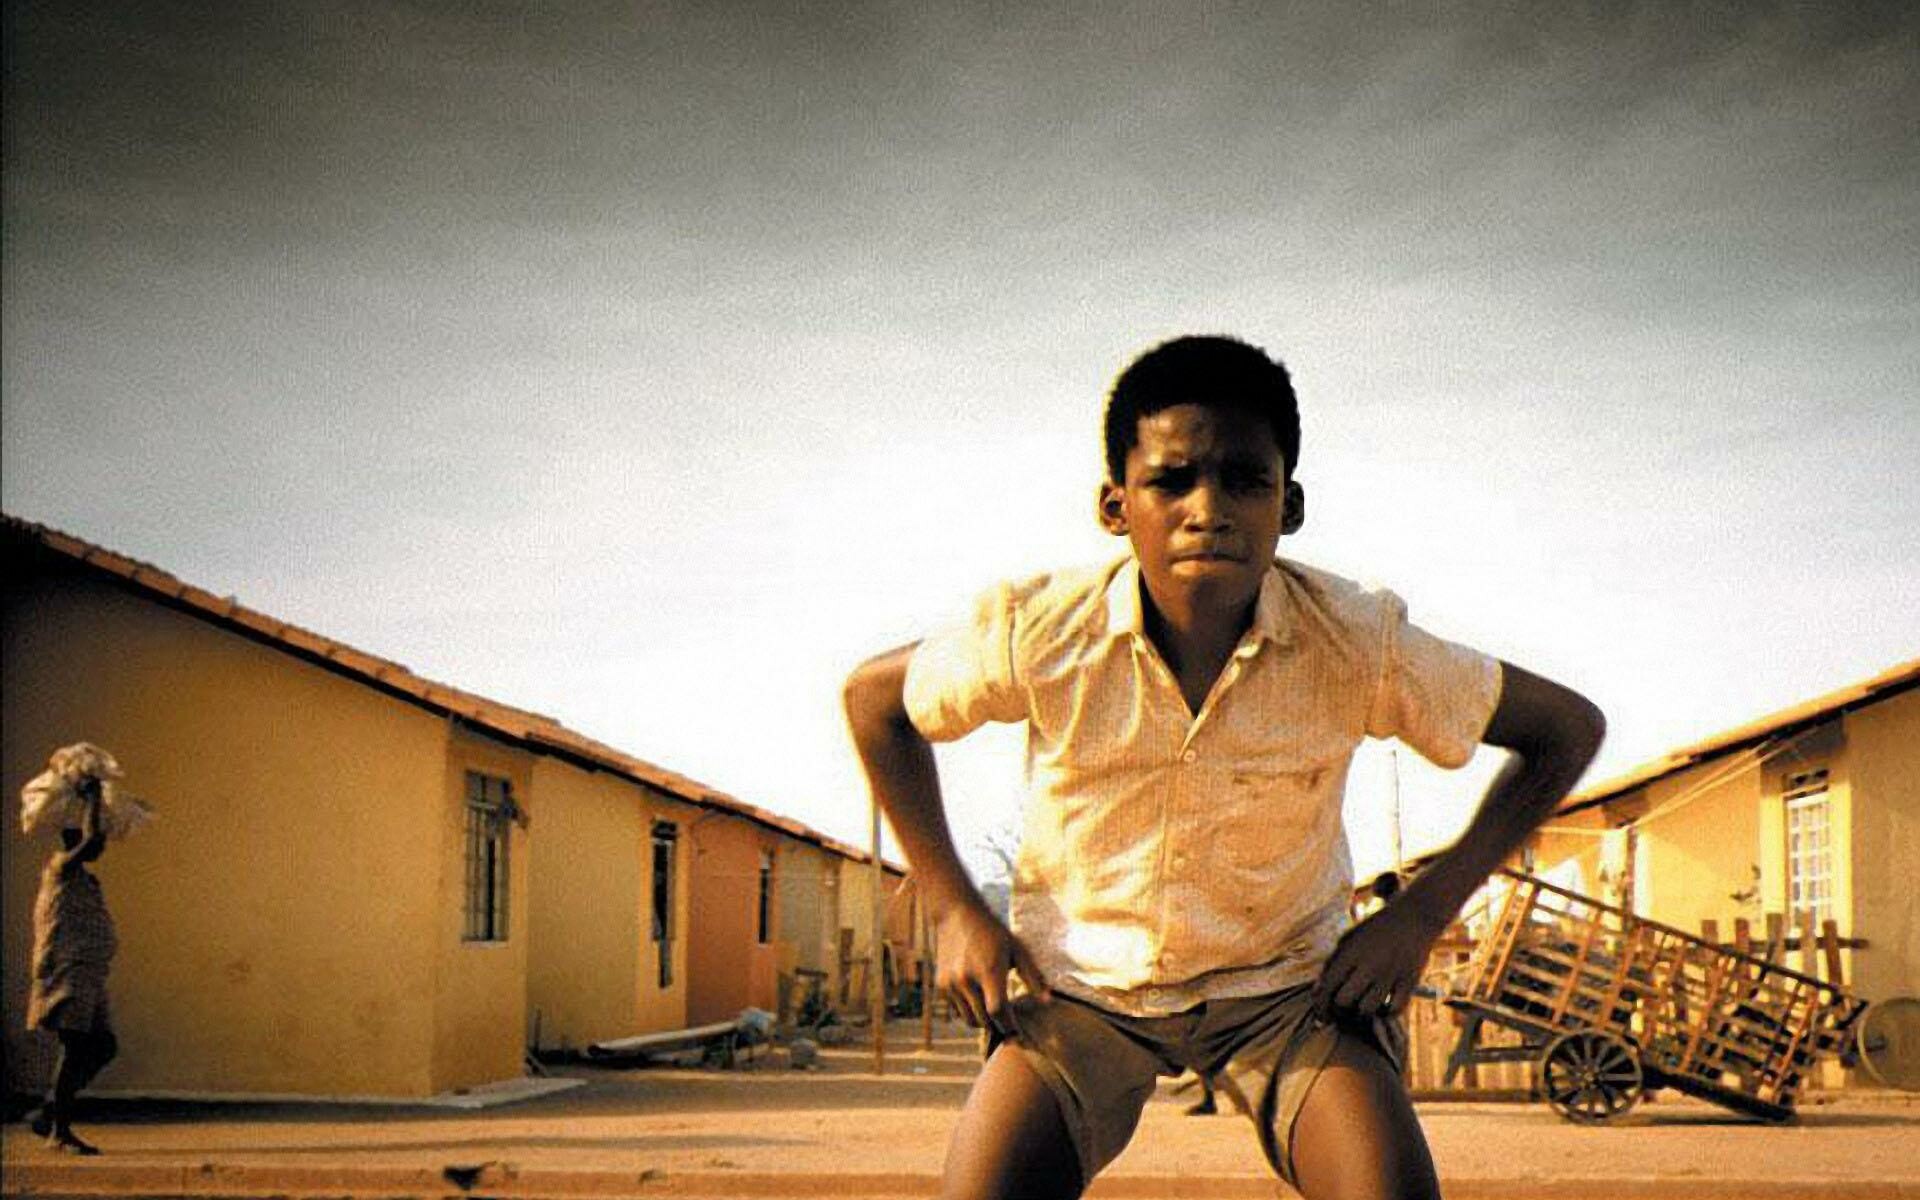 City of God: Alexandre Rodrigues as Rocket, the narrator, who dreams of becoming a photographer. 1920x1200 HD Wallpaper.